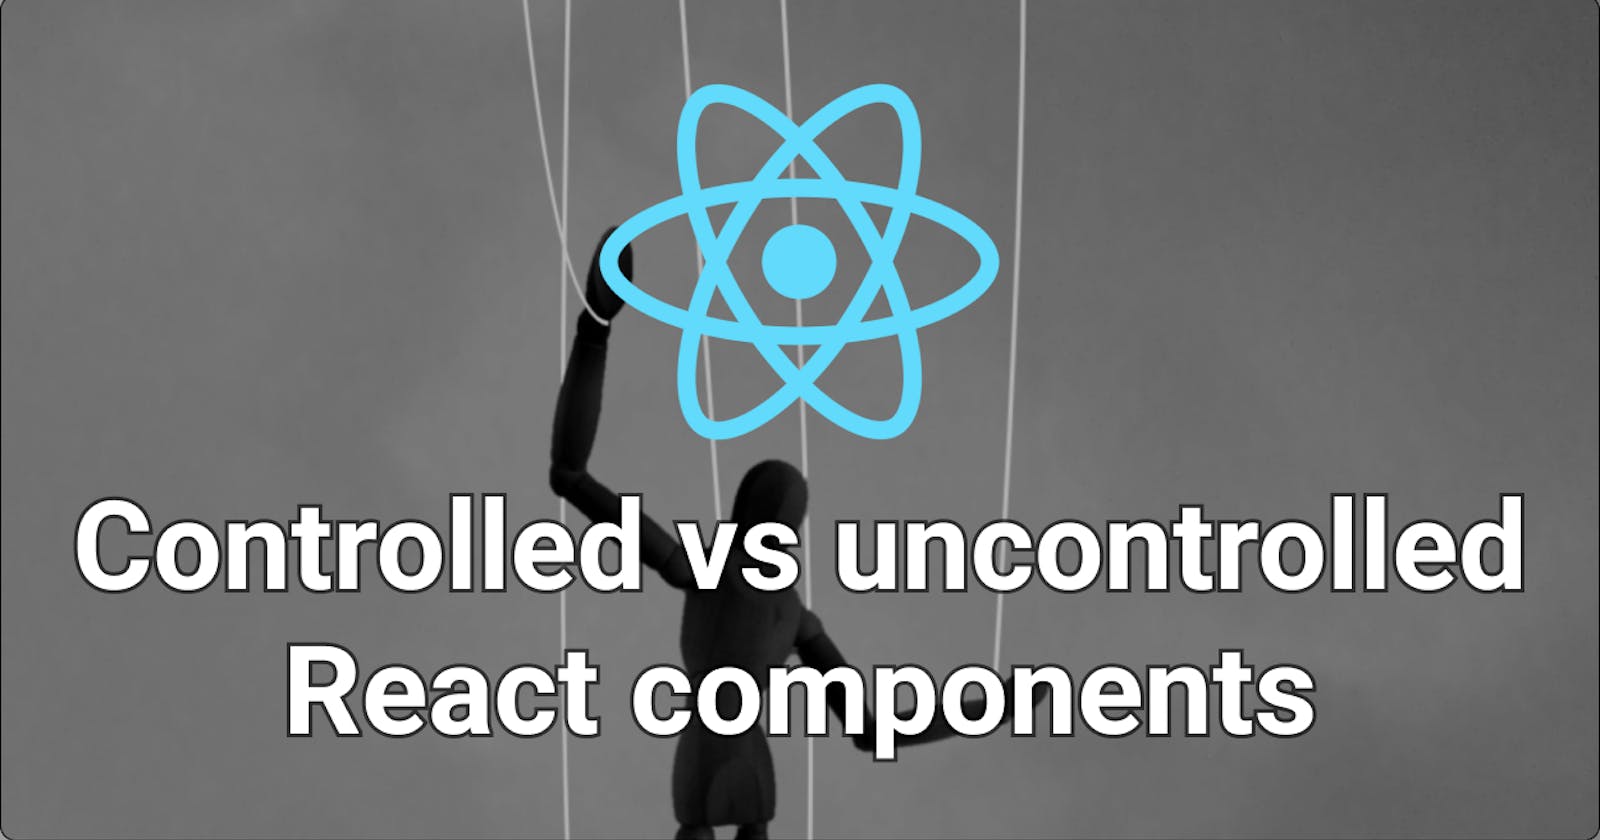 How to build a React component that is both controlled and uncontrolled (with examples)